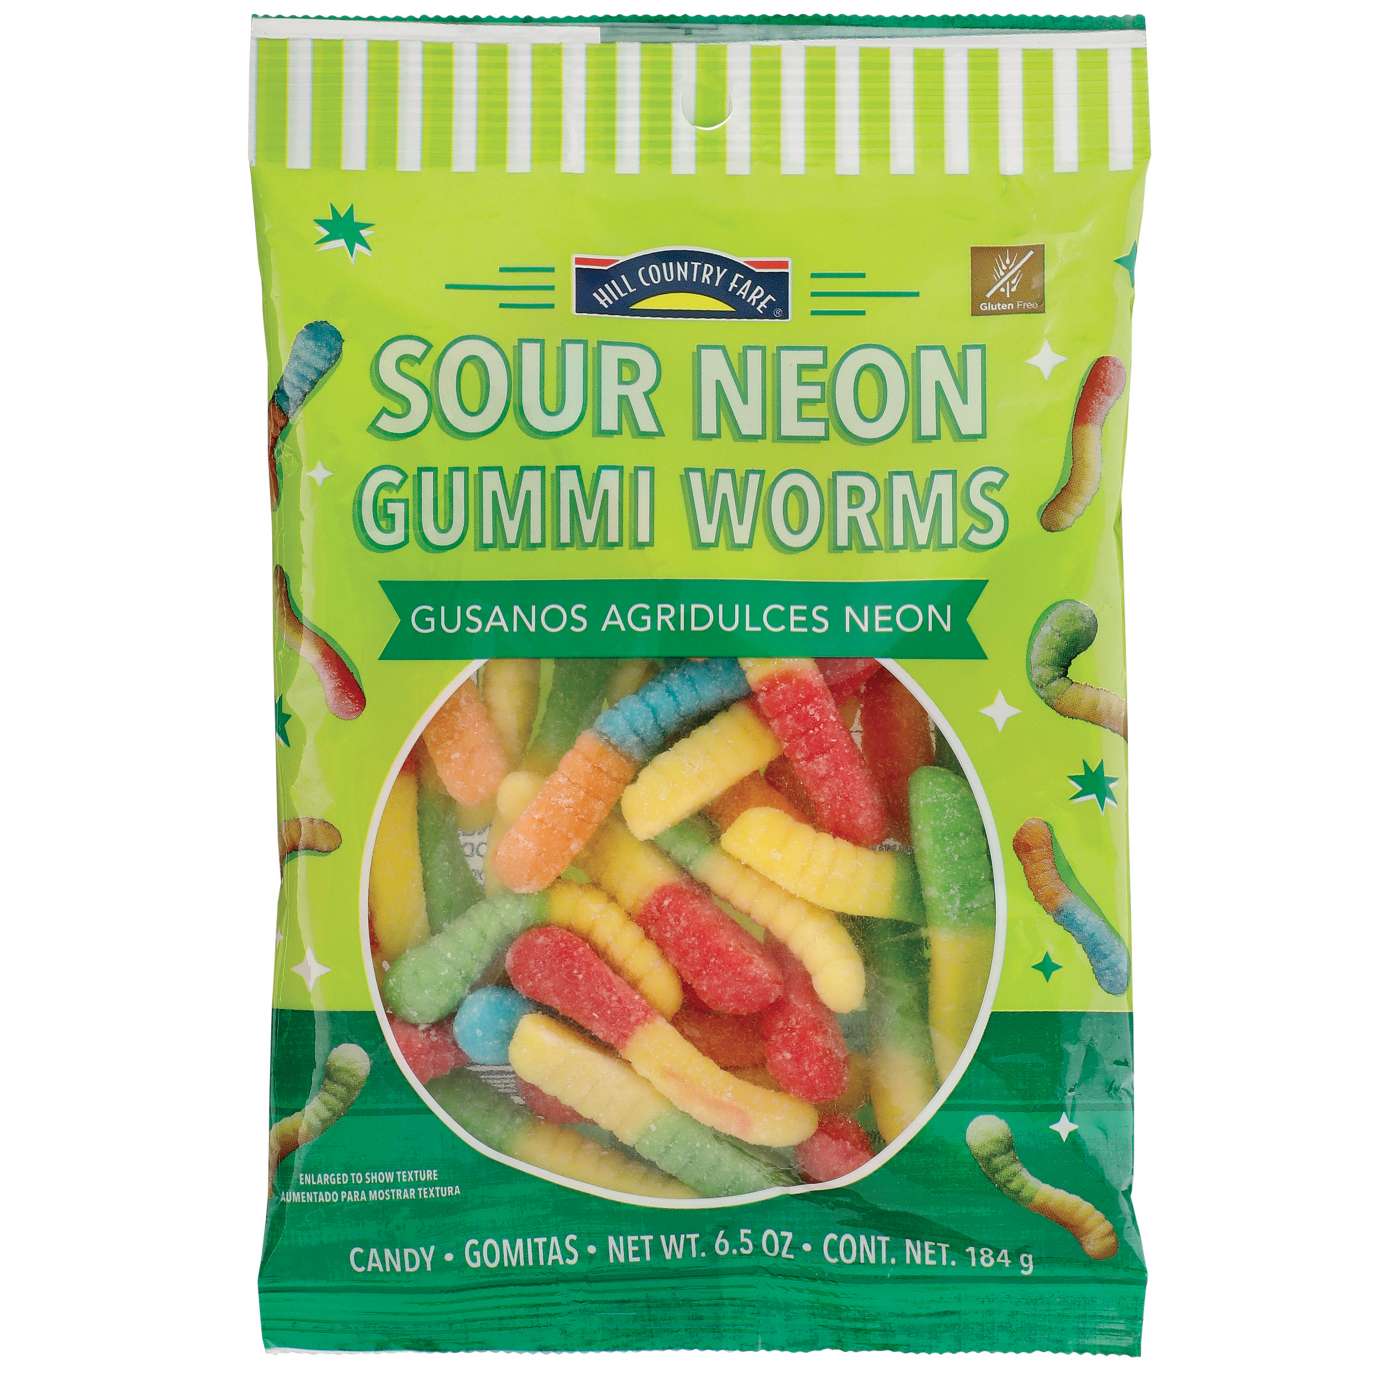 Hill Country Fare Sour Neon Gummi Worms; image 1 of 2